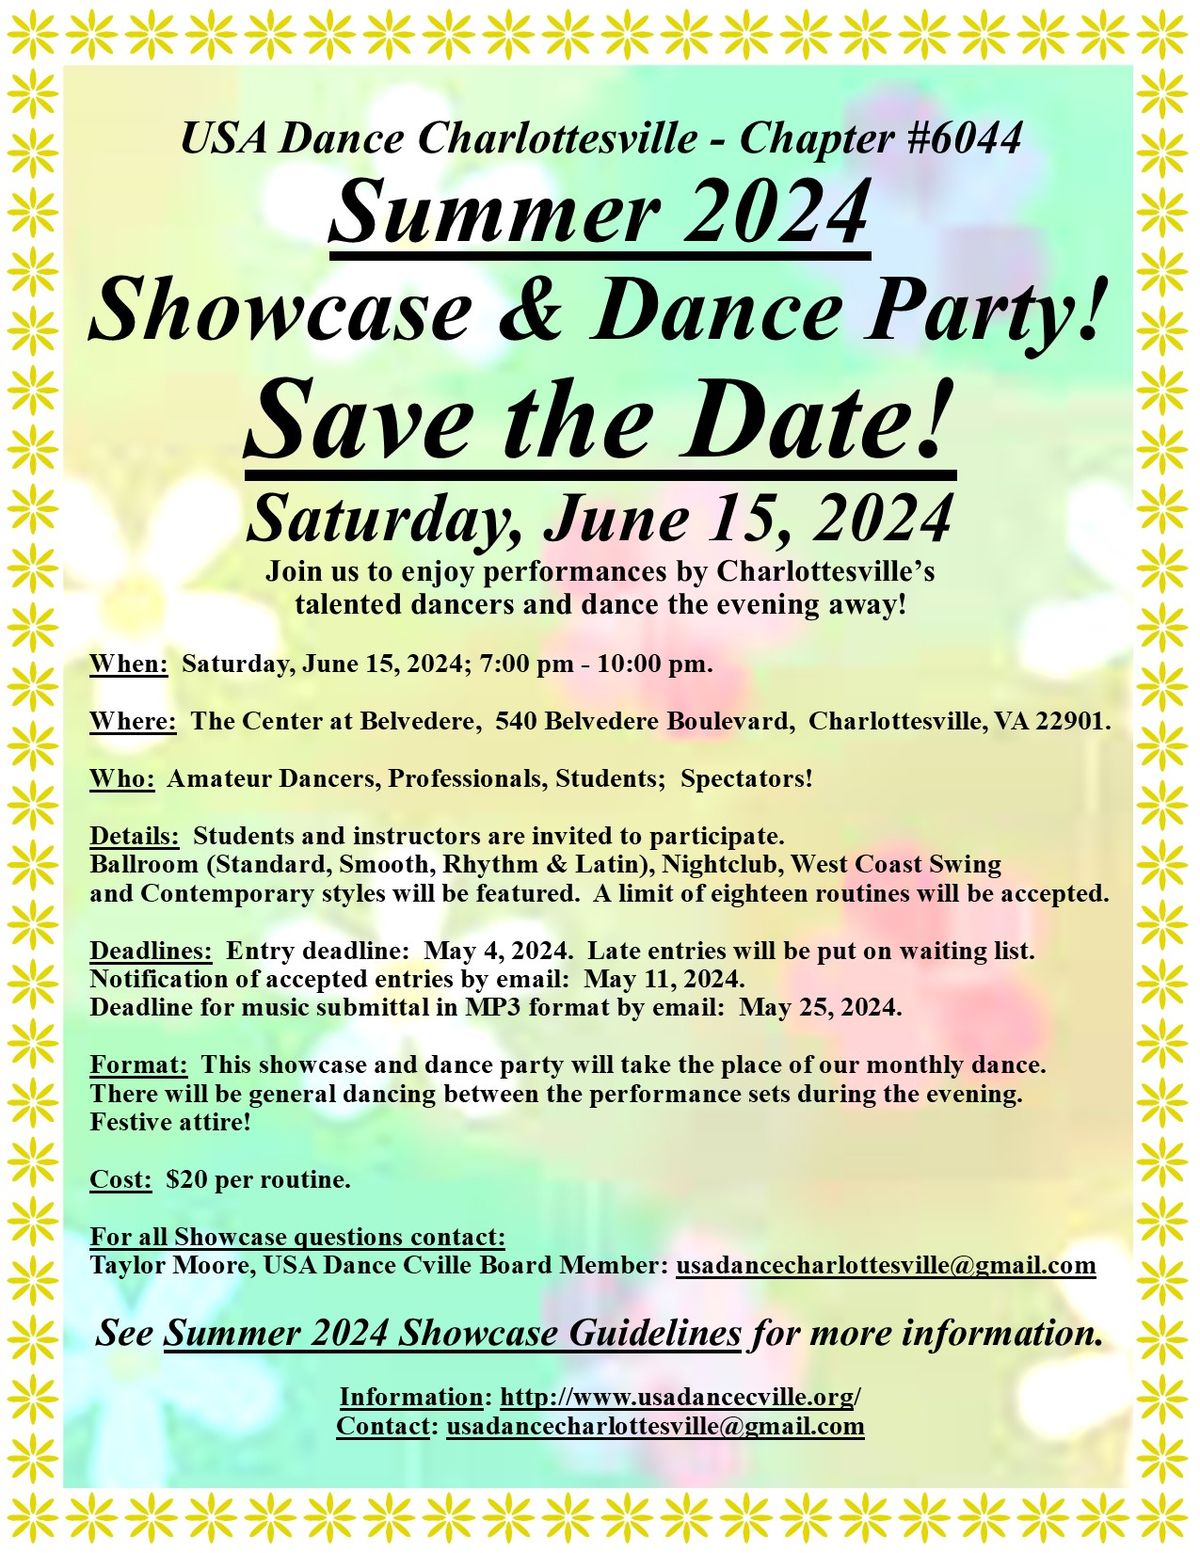 June 2024 SHOWCASE and Dance Party - USA Dance Charlottesville